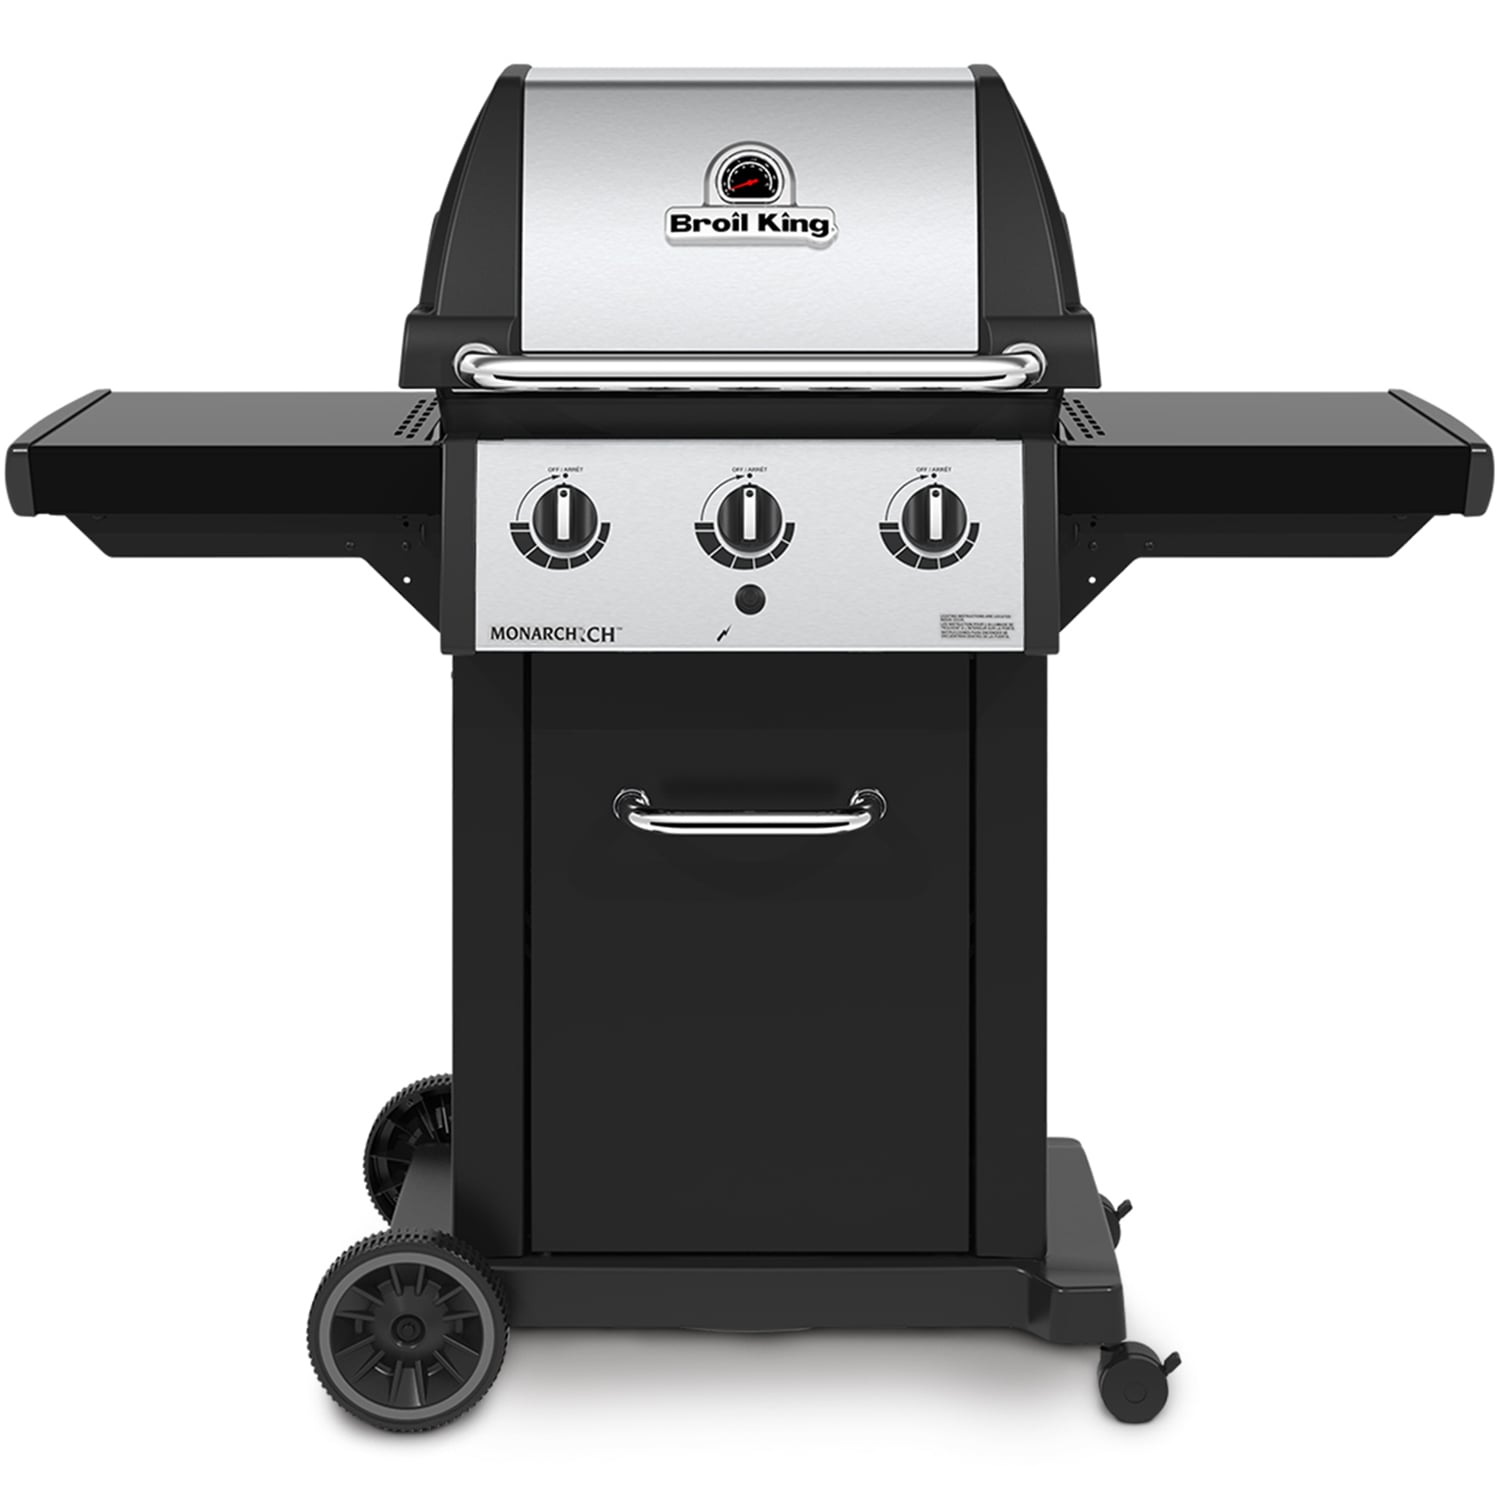 Monarch 320 Stainless Steel/Black 3-Burner Liquid Propane Gas Grill | - Broil King 834254